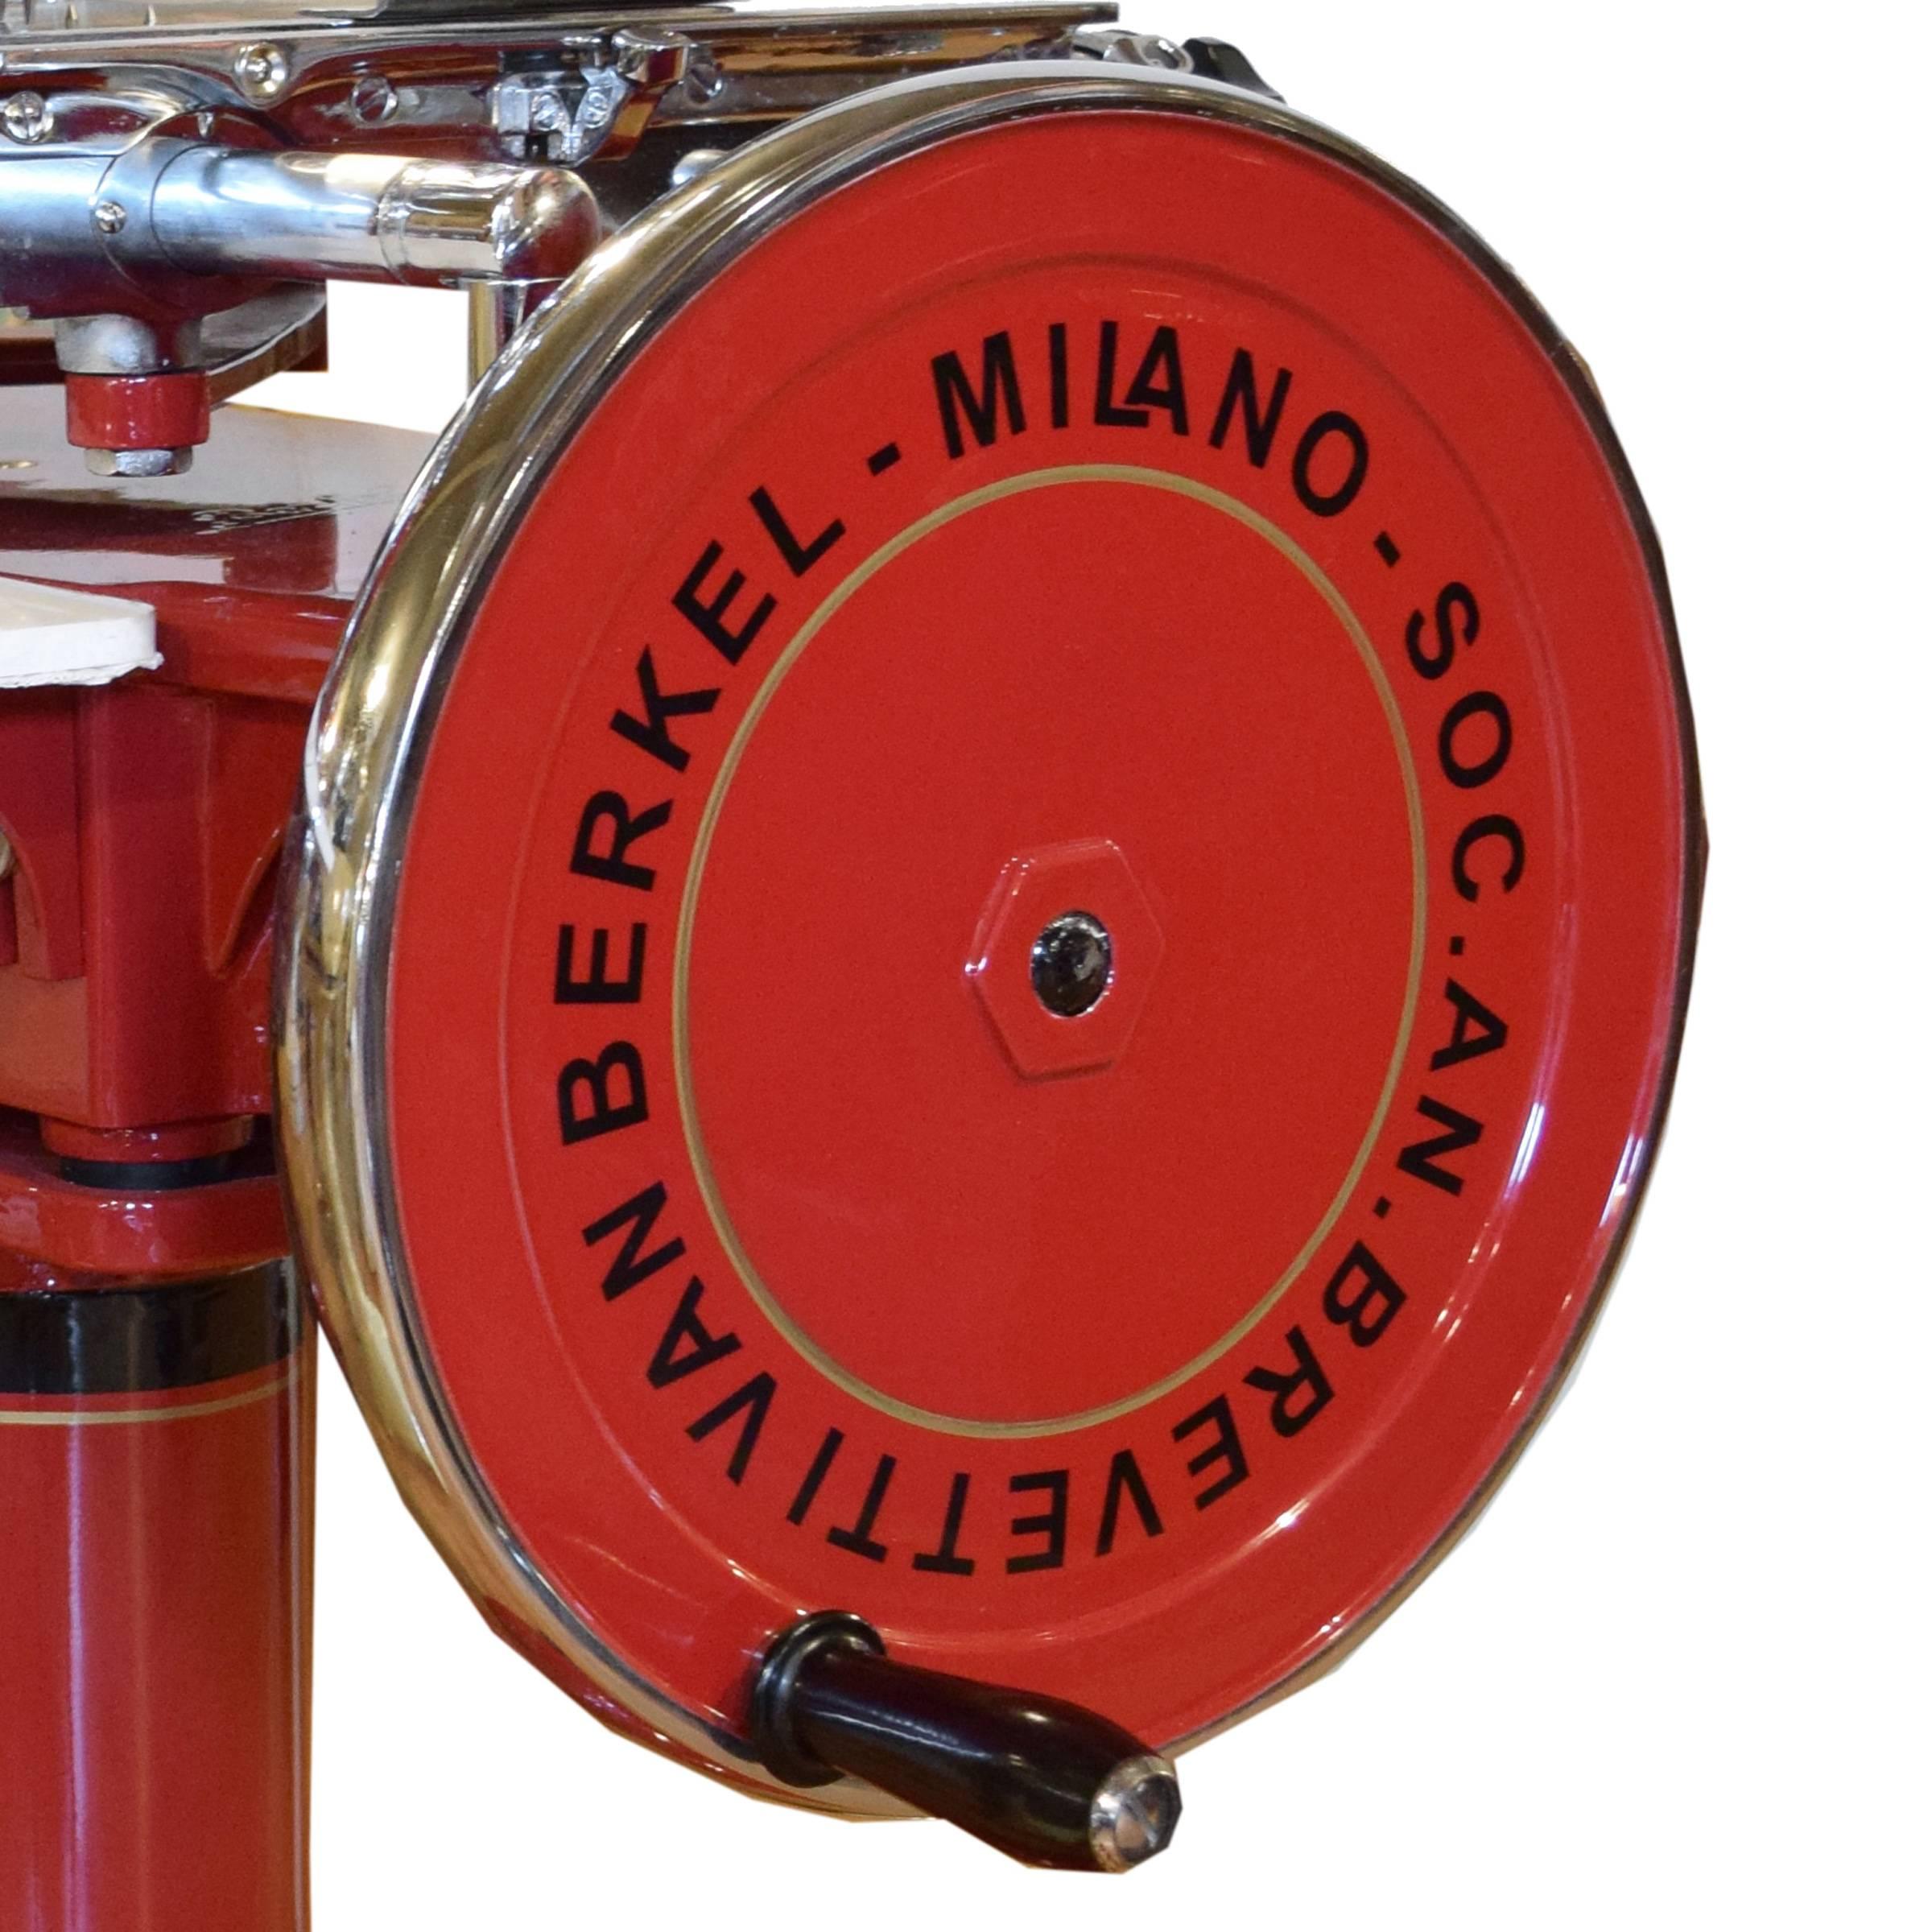 A rare Berkel model ten meat slicer in a red high gloss enamel with black and gold pinstriping, manufactured in Milan, Italy. This model from circa 1950 is flywheel operated and features 15 different slicing thicknesses and a blade sharpener. This